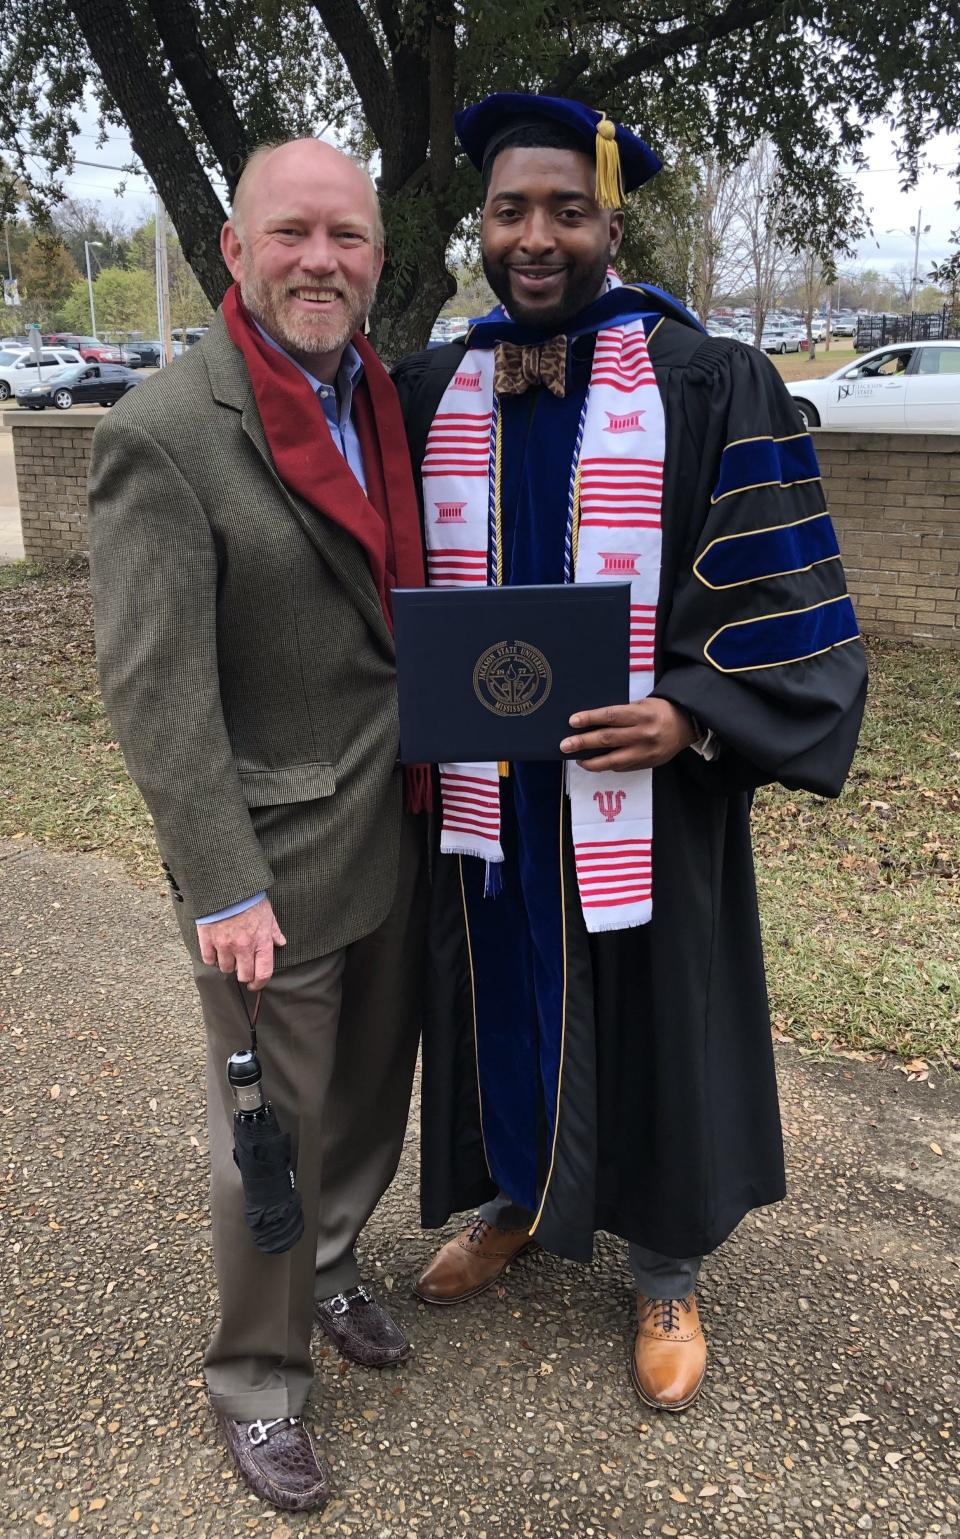 Garen Haddad with Jeremy Whittaker when he earned his doctorate.